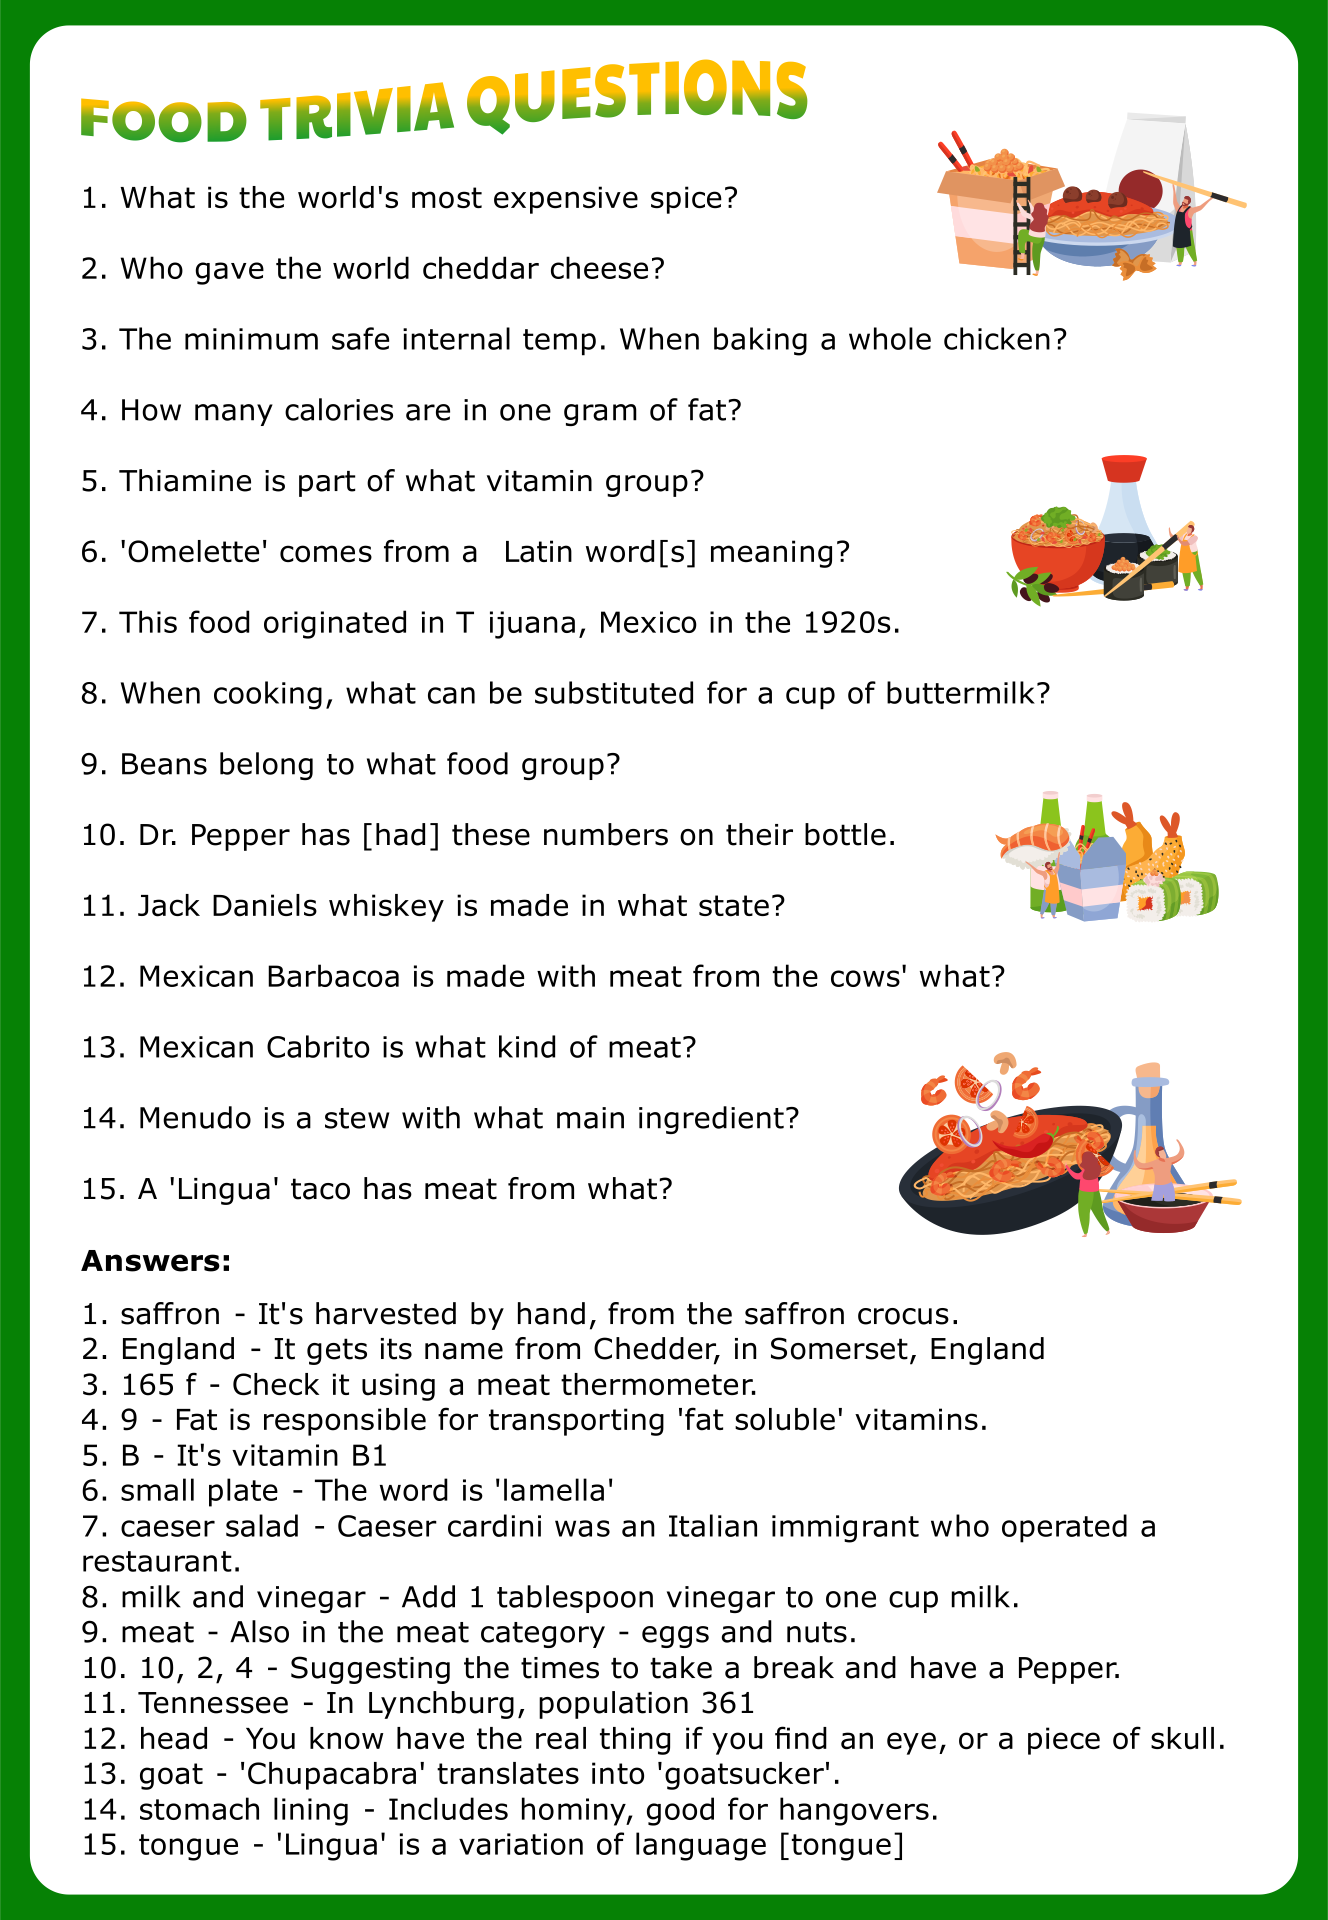 Fast Food Trivia Questions And Answers Printable - Challenge Your ...